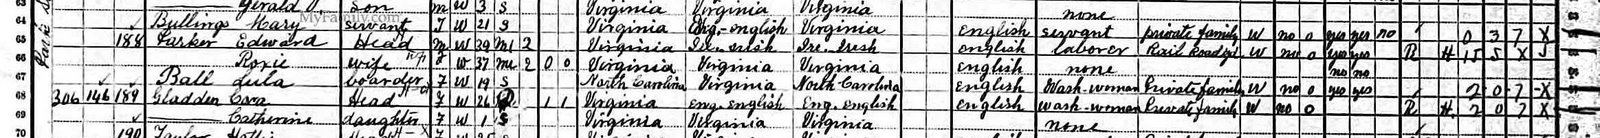 [Gladden,+Cora+Catherine+and+Mary+Ann+Gladden+Bullings+-+1910+US+Census+(VA)+cropped.jpg]